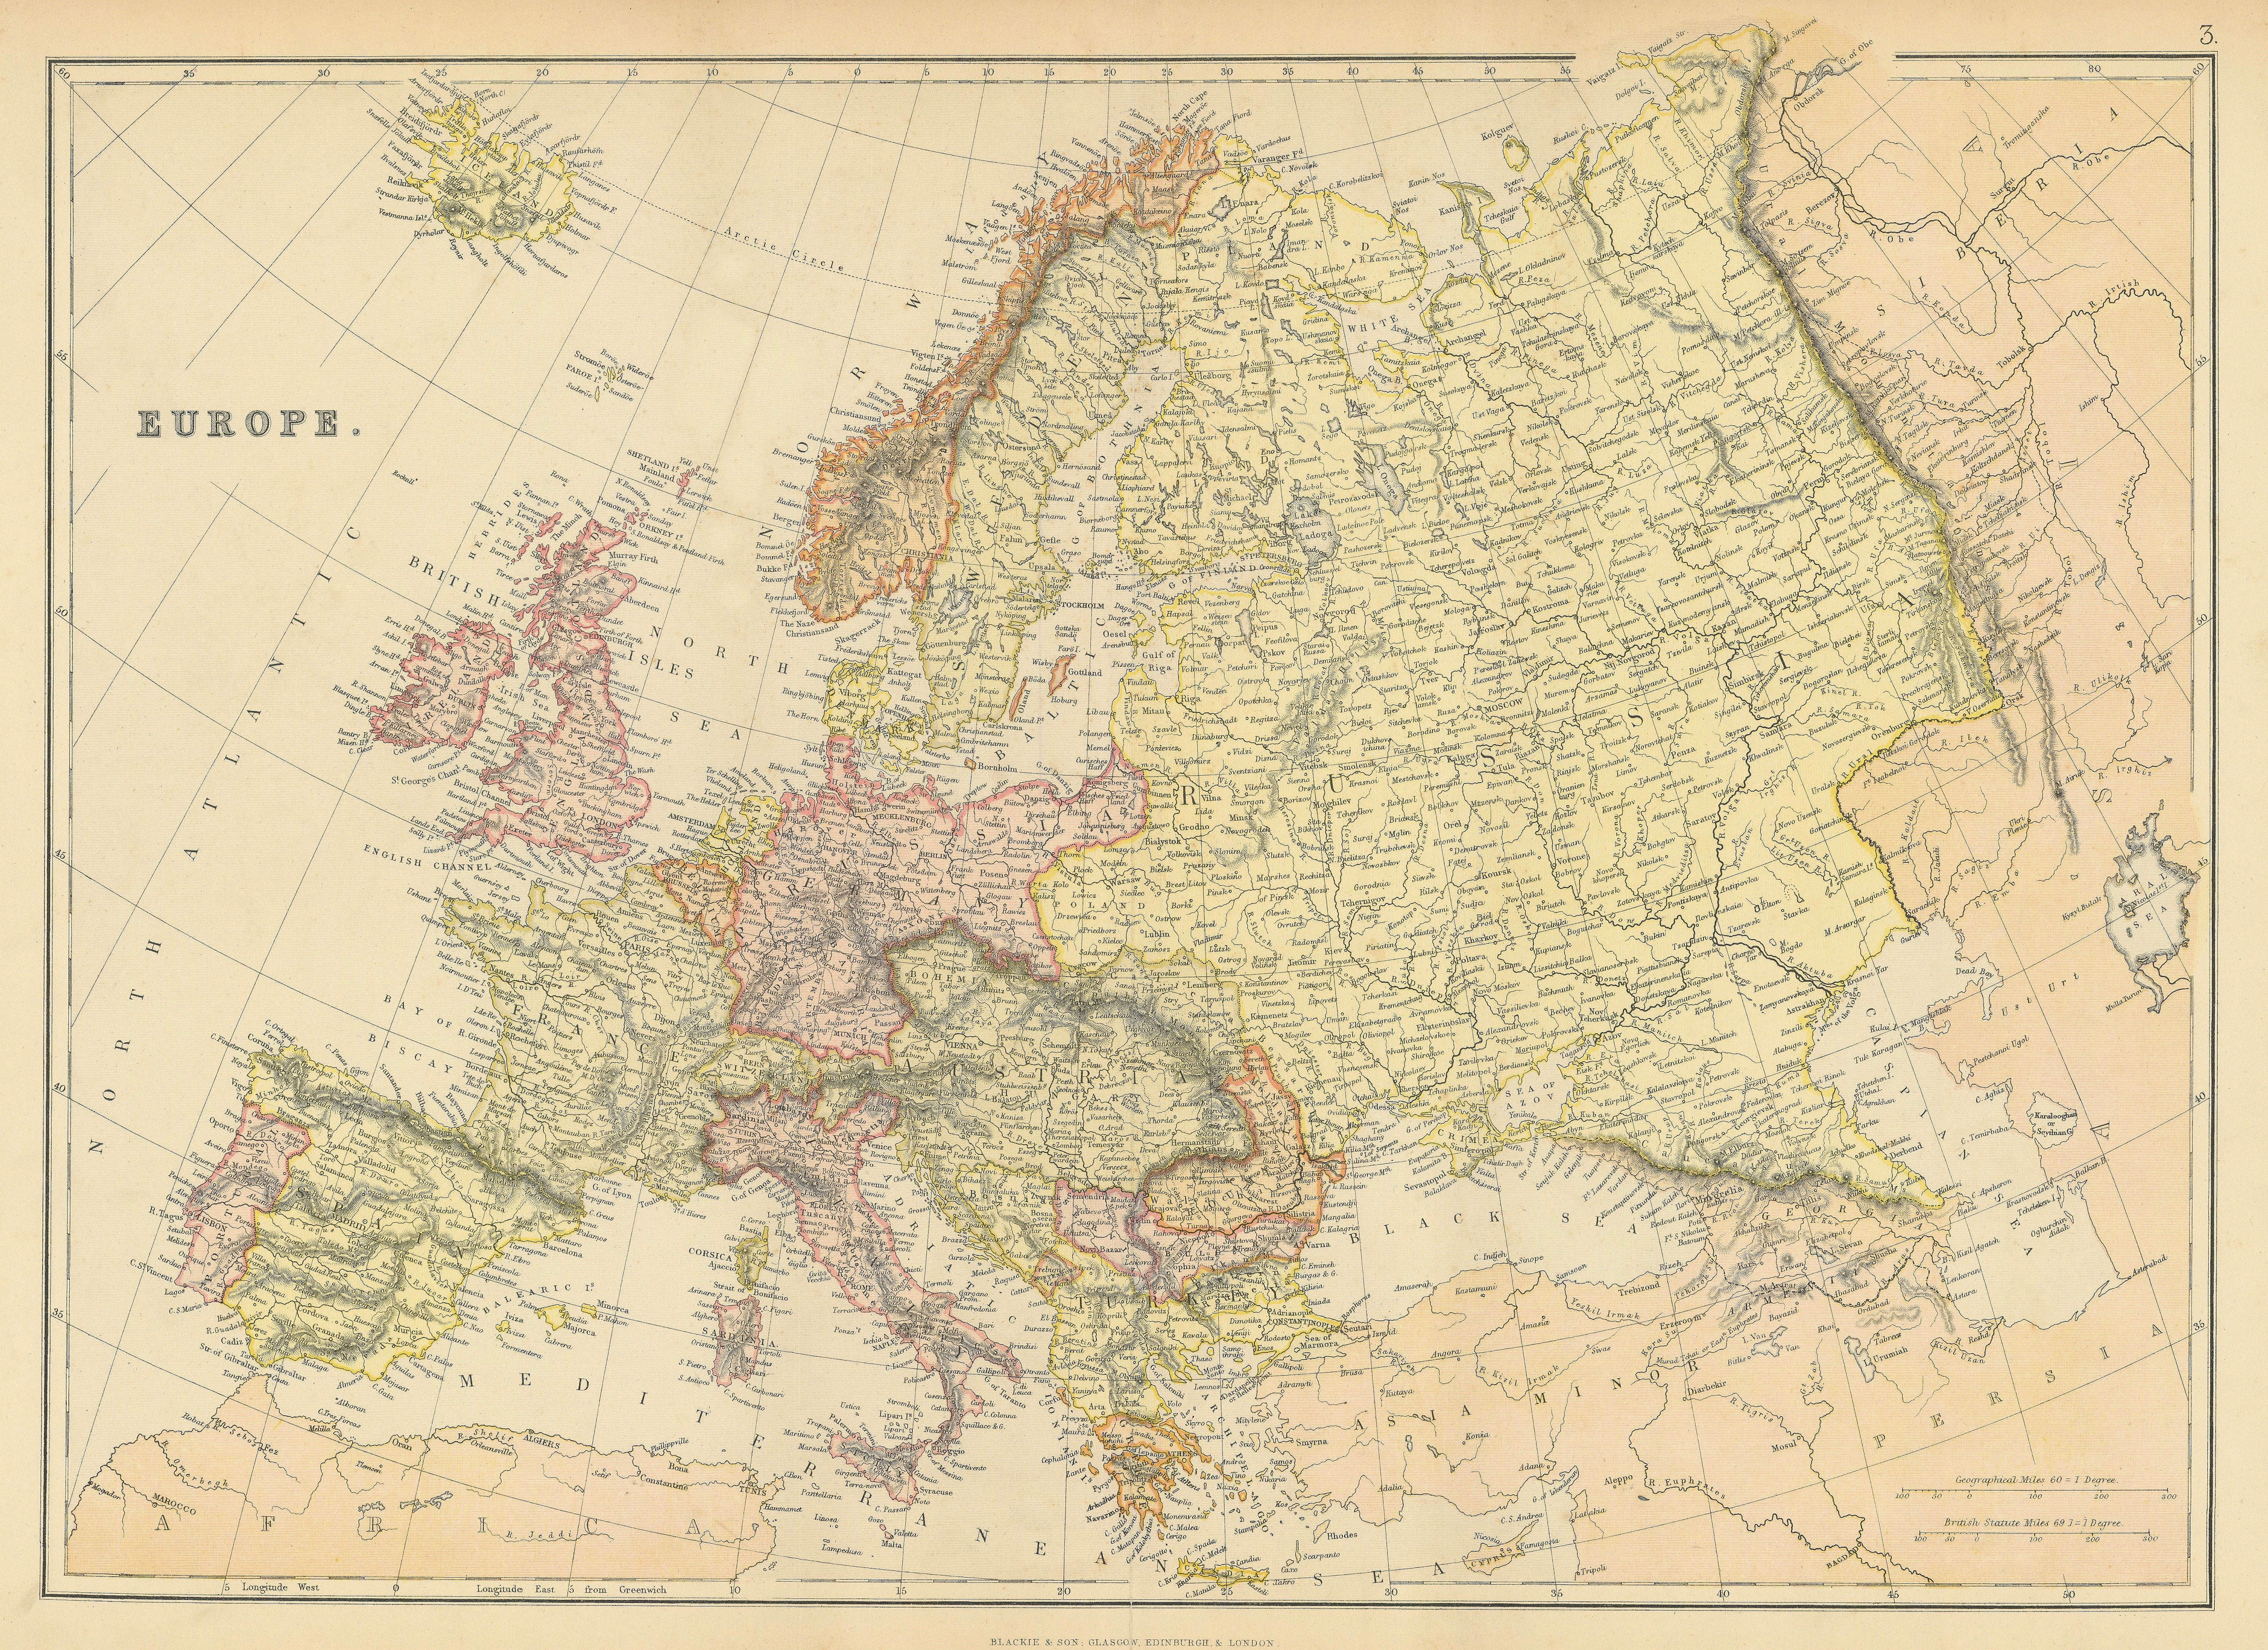 Associate Product EUROPE POLITICAL. Russia excludes Georgia. BLACKIE 1886 old antique map chart